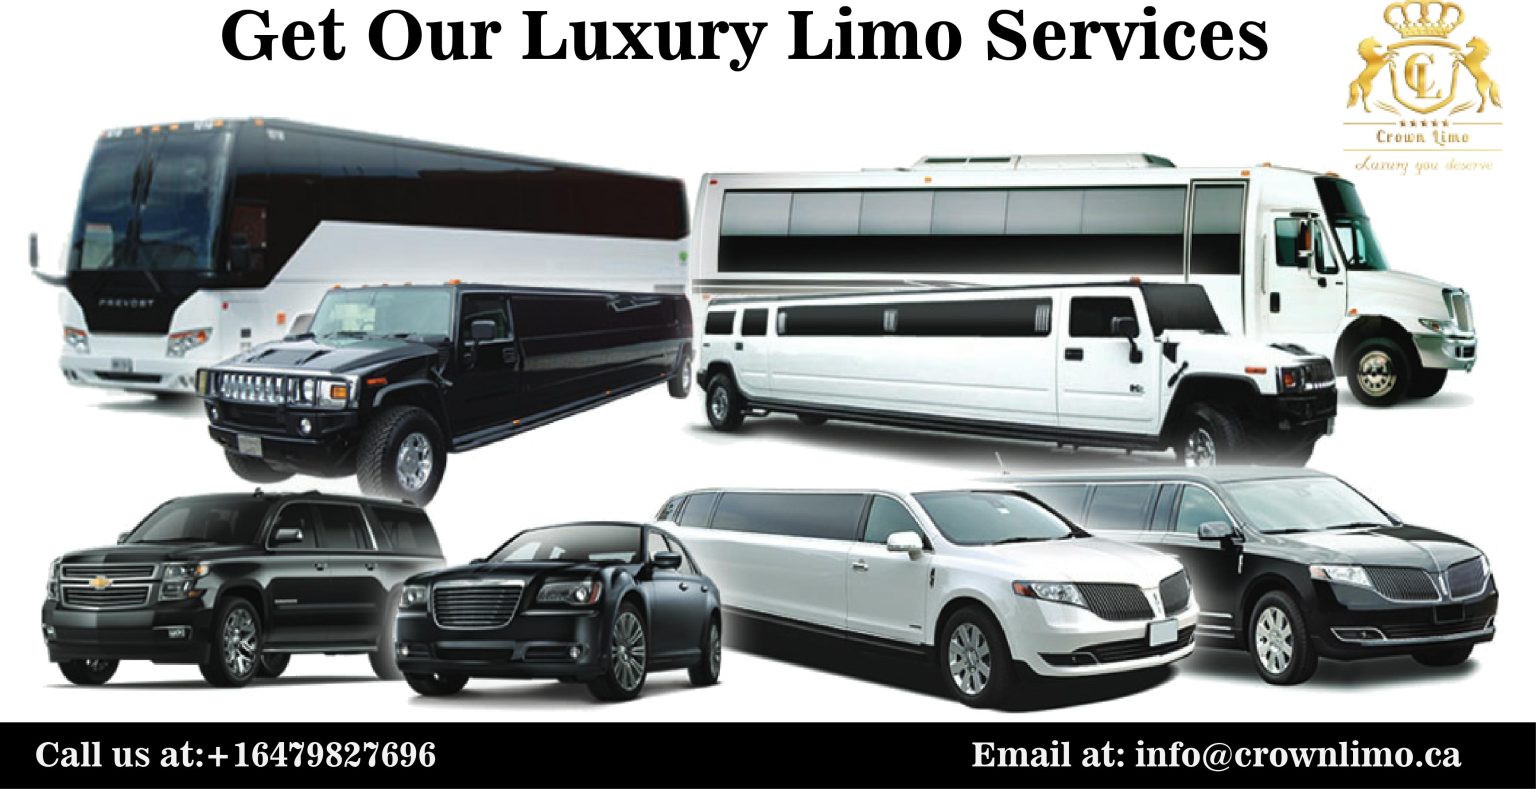 Get our luxury Rental Cars